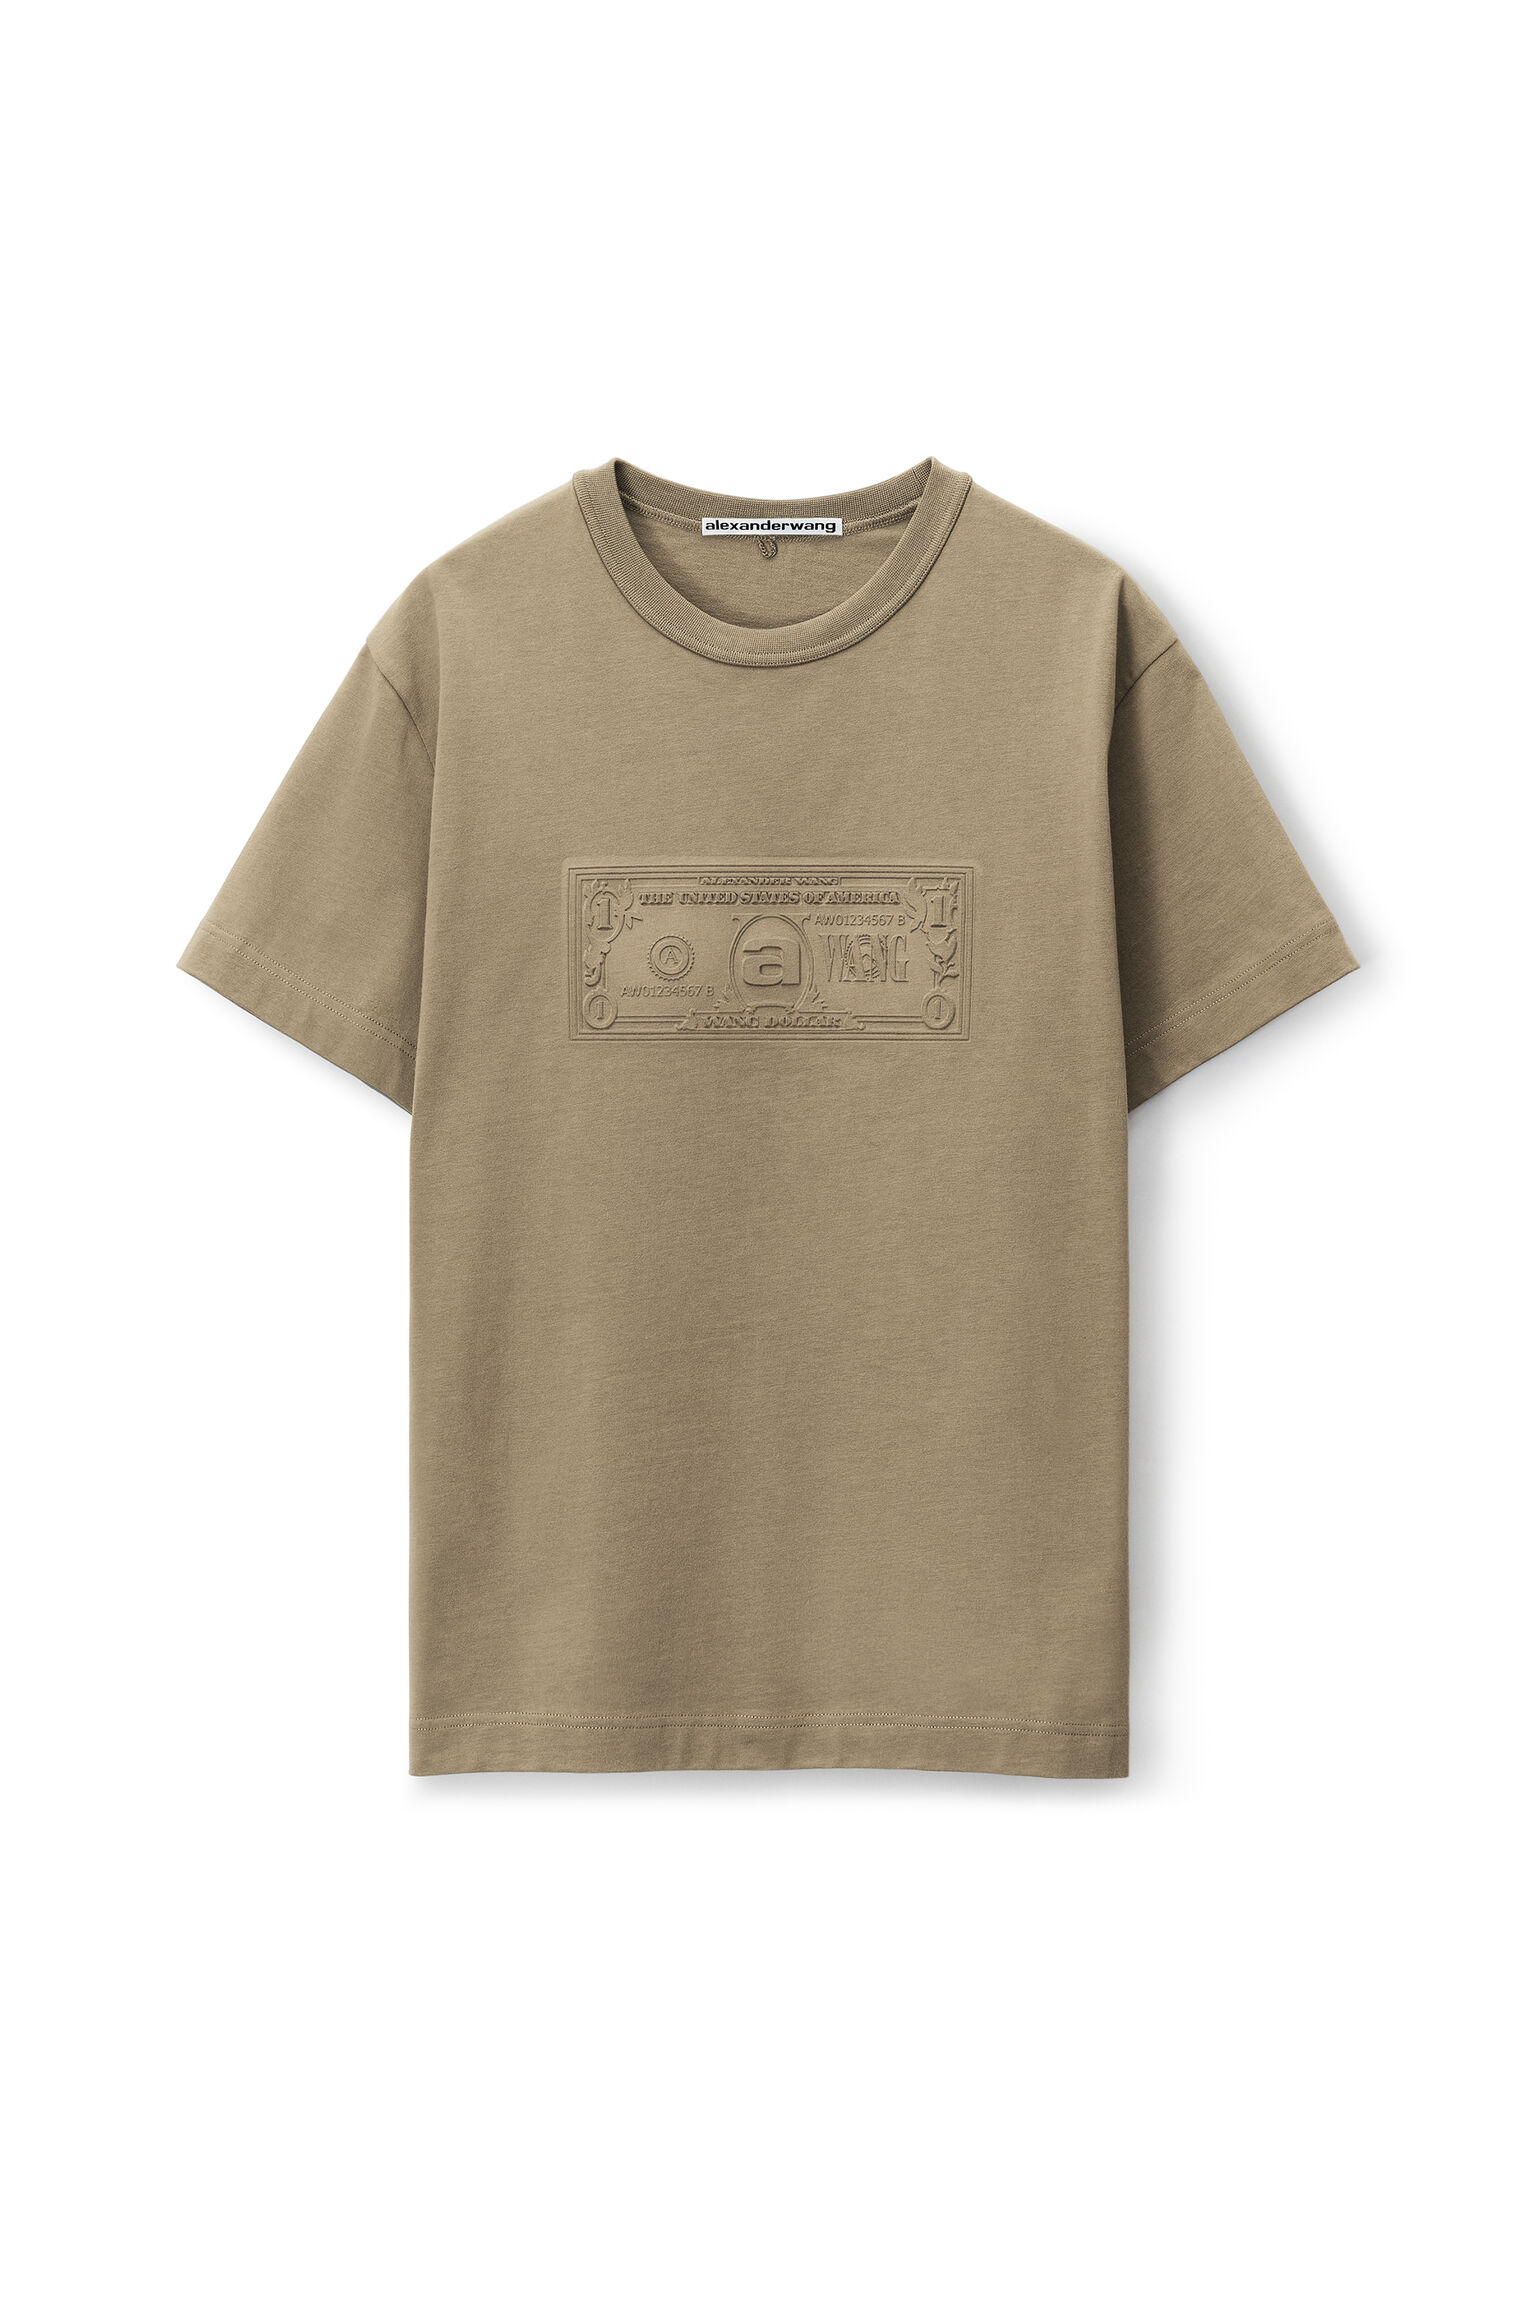 Starbucks Sells Alexander Wang-Designed T-Shirt With Fake Coffee Stains for  $85